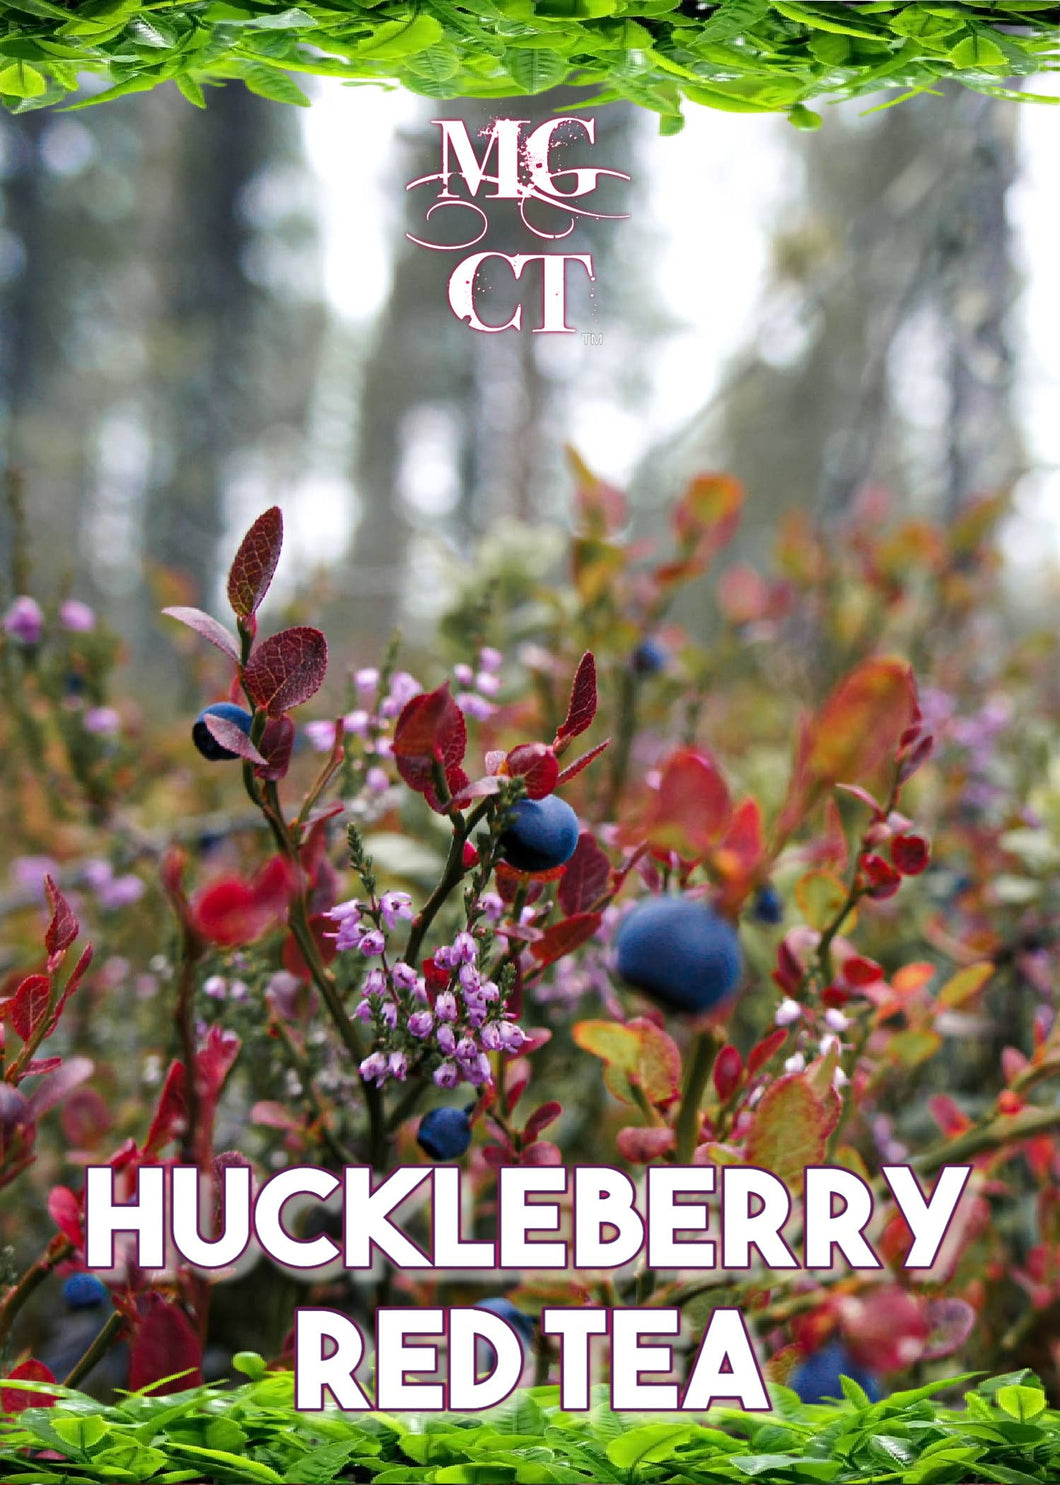 Huckleberry Flavored Red Tea - By: Morning Glory Coffee & Tea